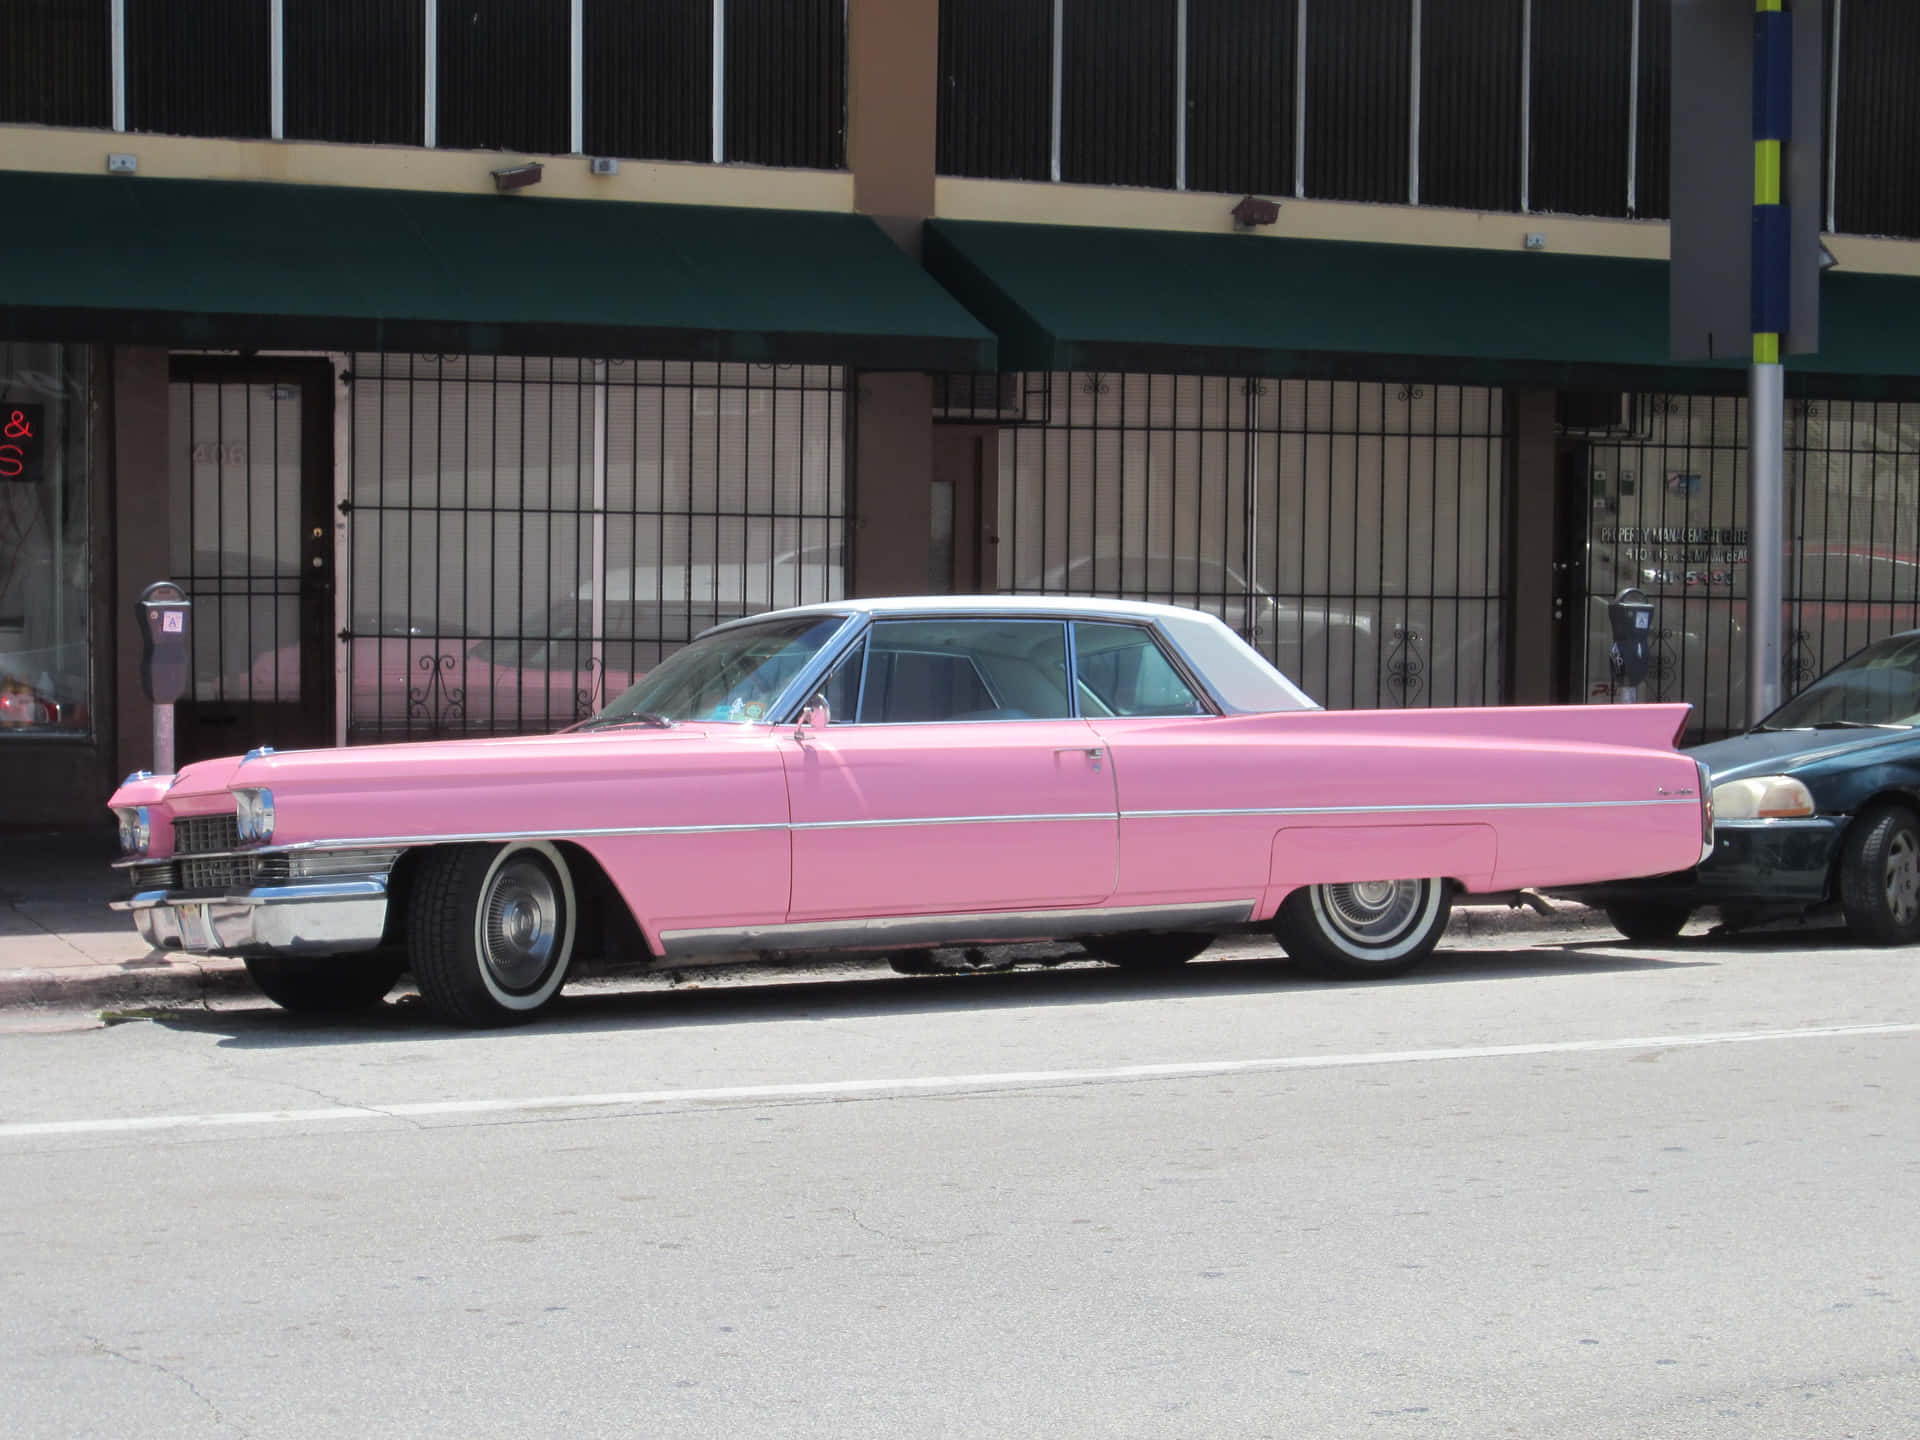 A Stunning Pink Cadillac Gleaming in the Sun Wallpaper